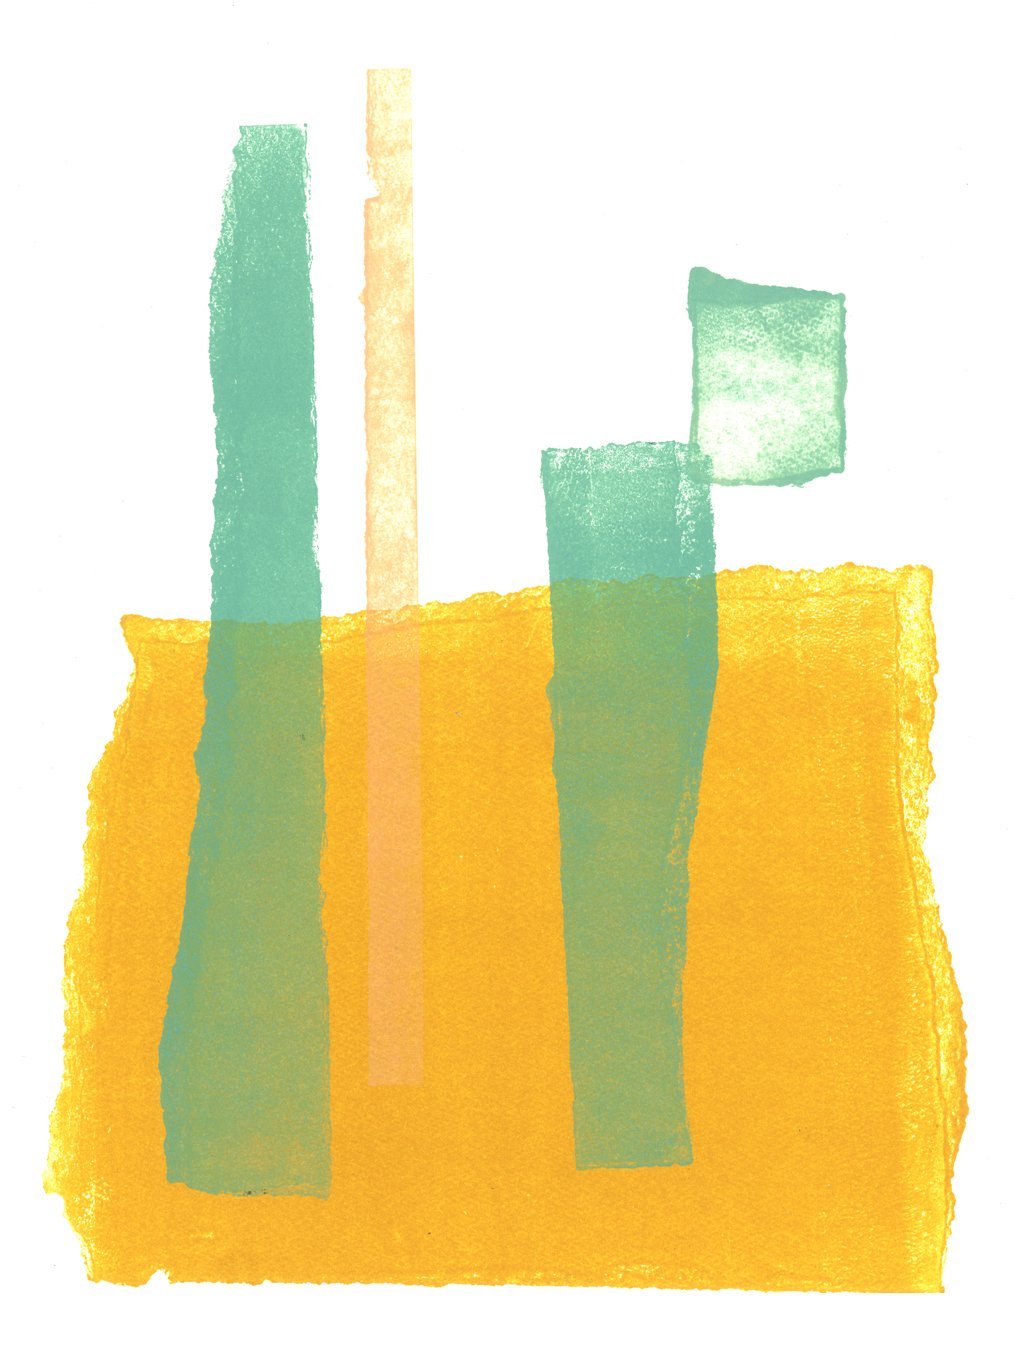   ABSTRACT YELLOW 2                                                                                      Monoprint   - BUY ME -   - CLICK TO VIEW ABSTRACT COLLECTION -    